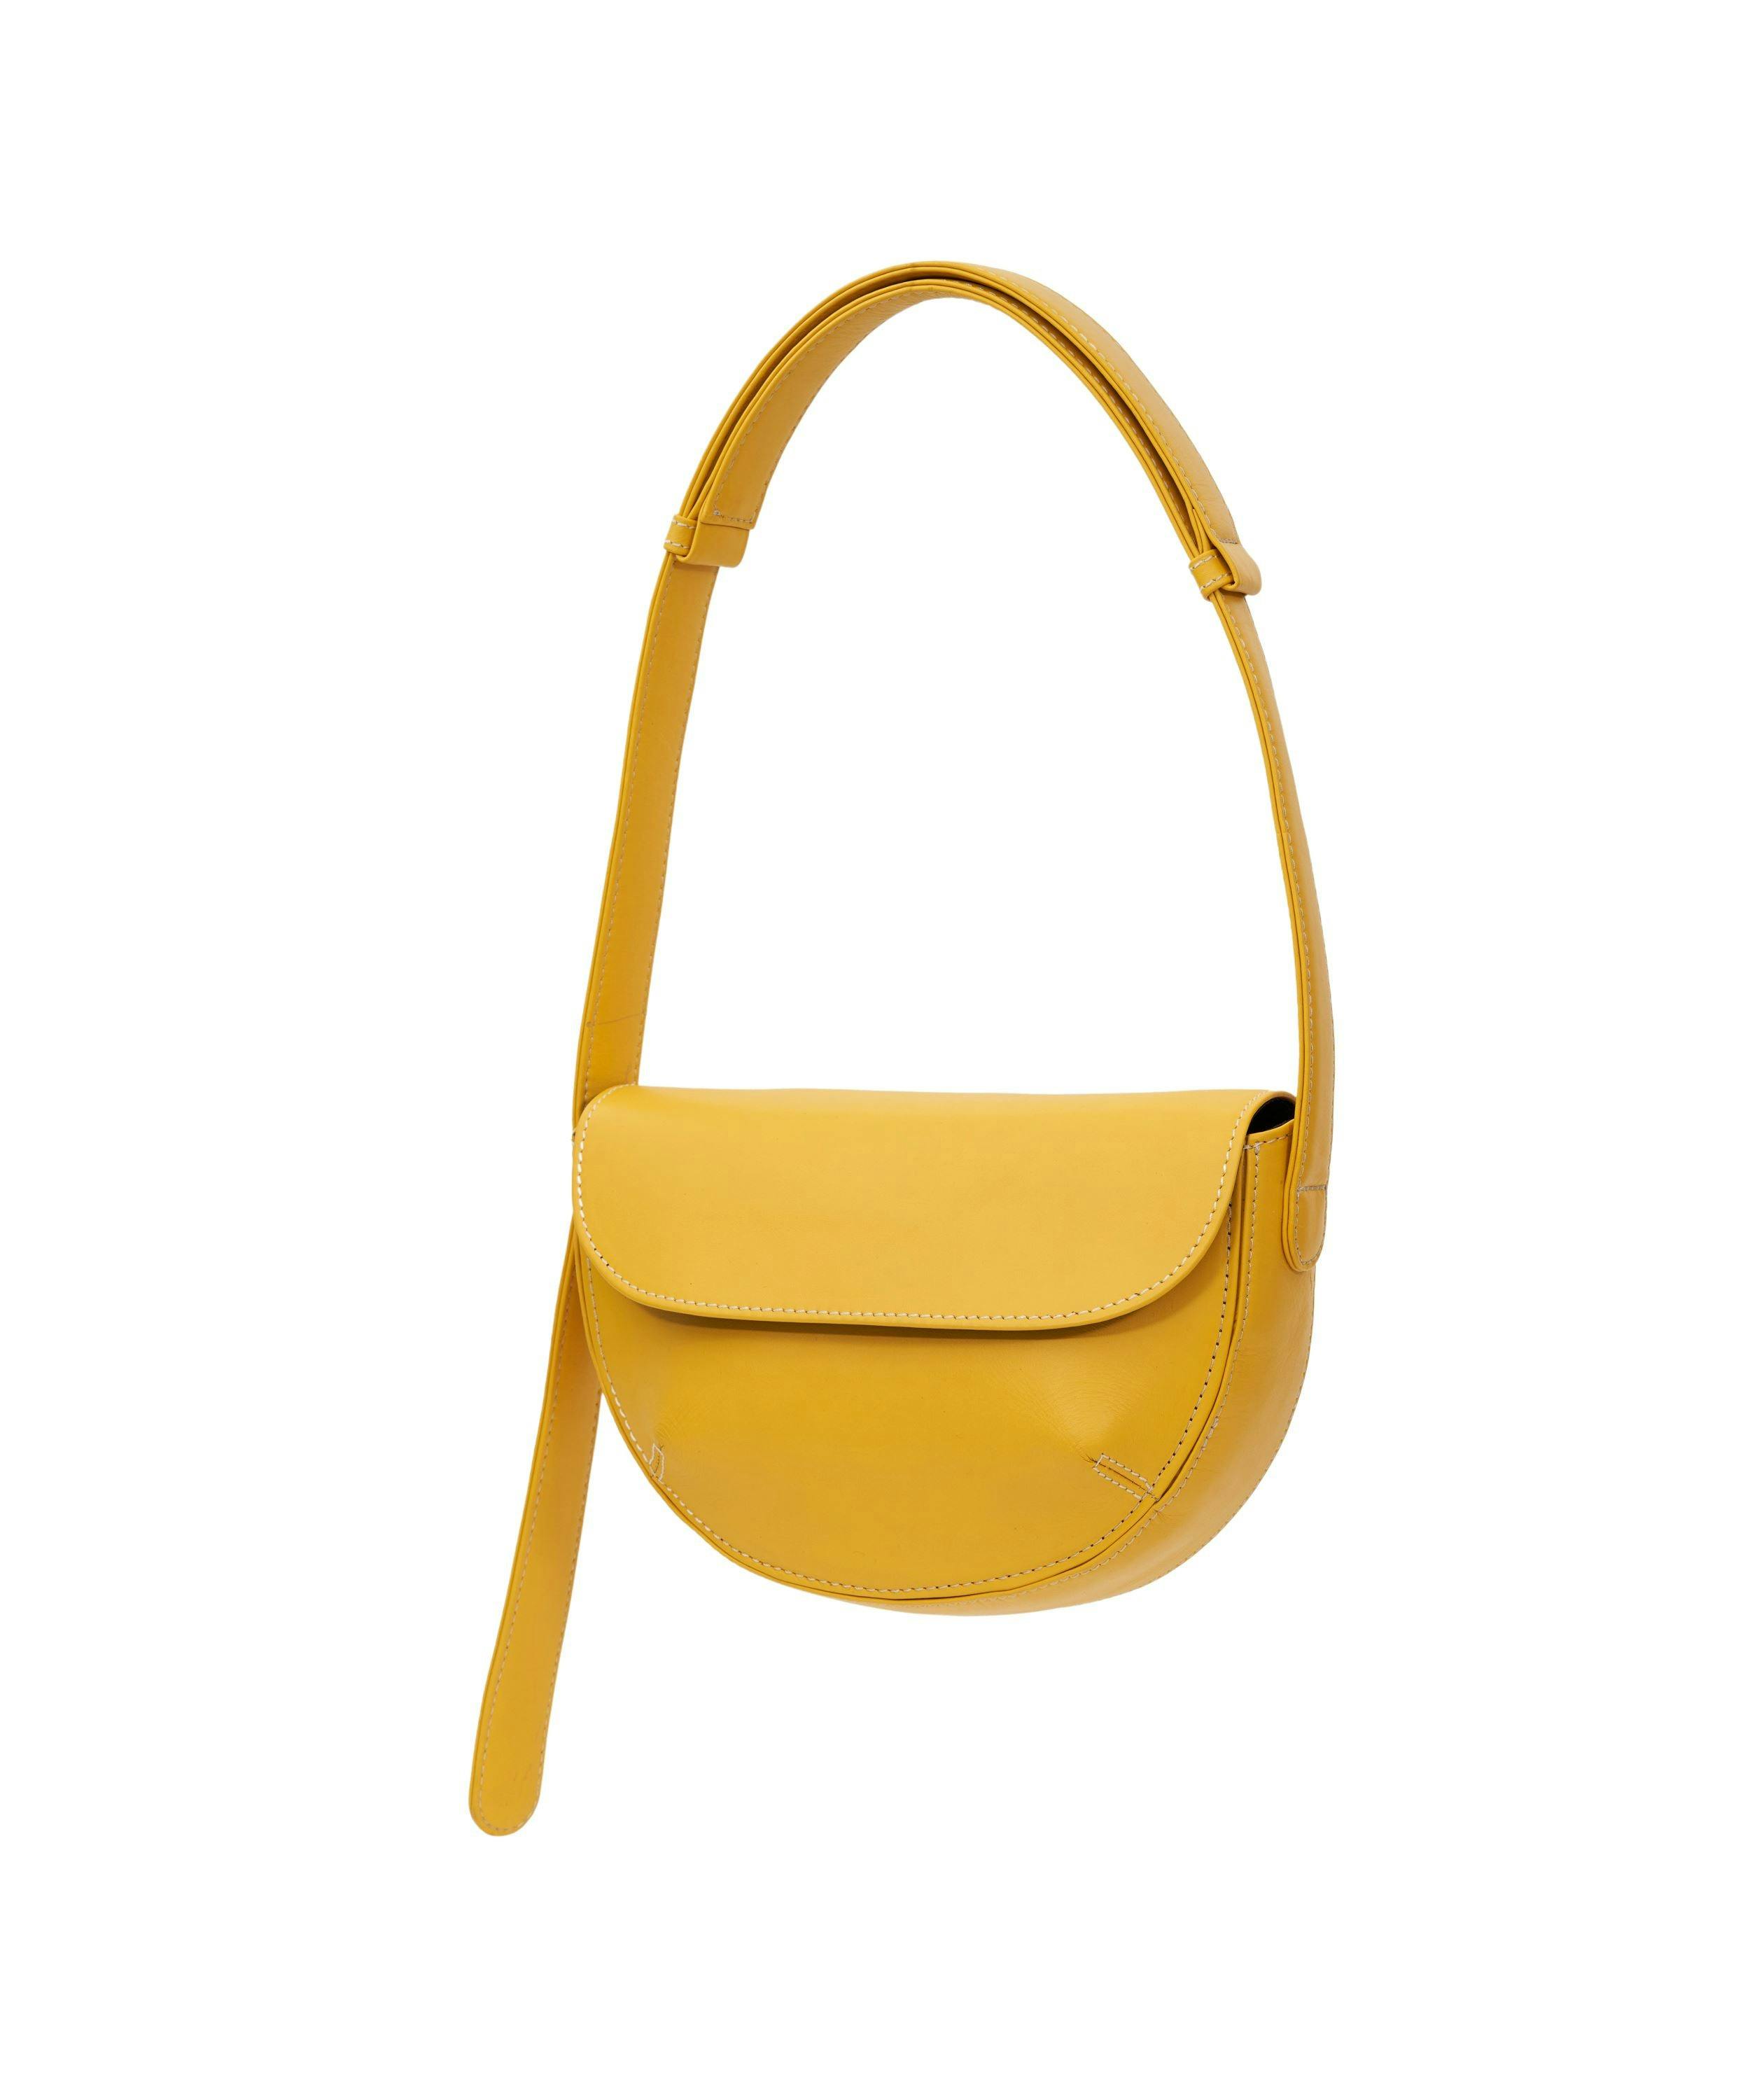 Billie Bag in Spruce, a product by Mistry 